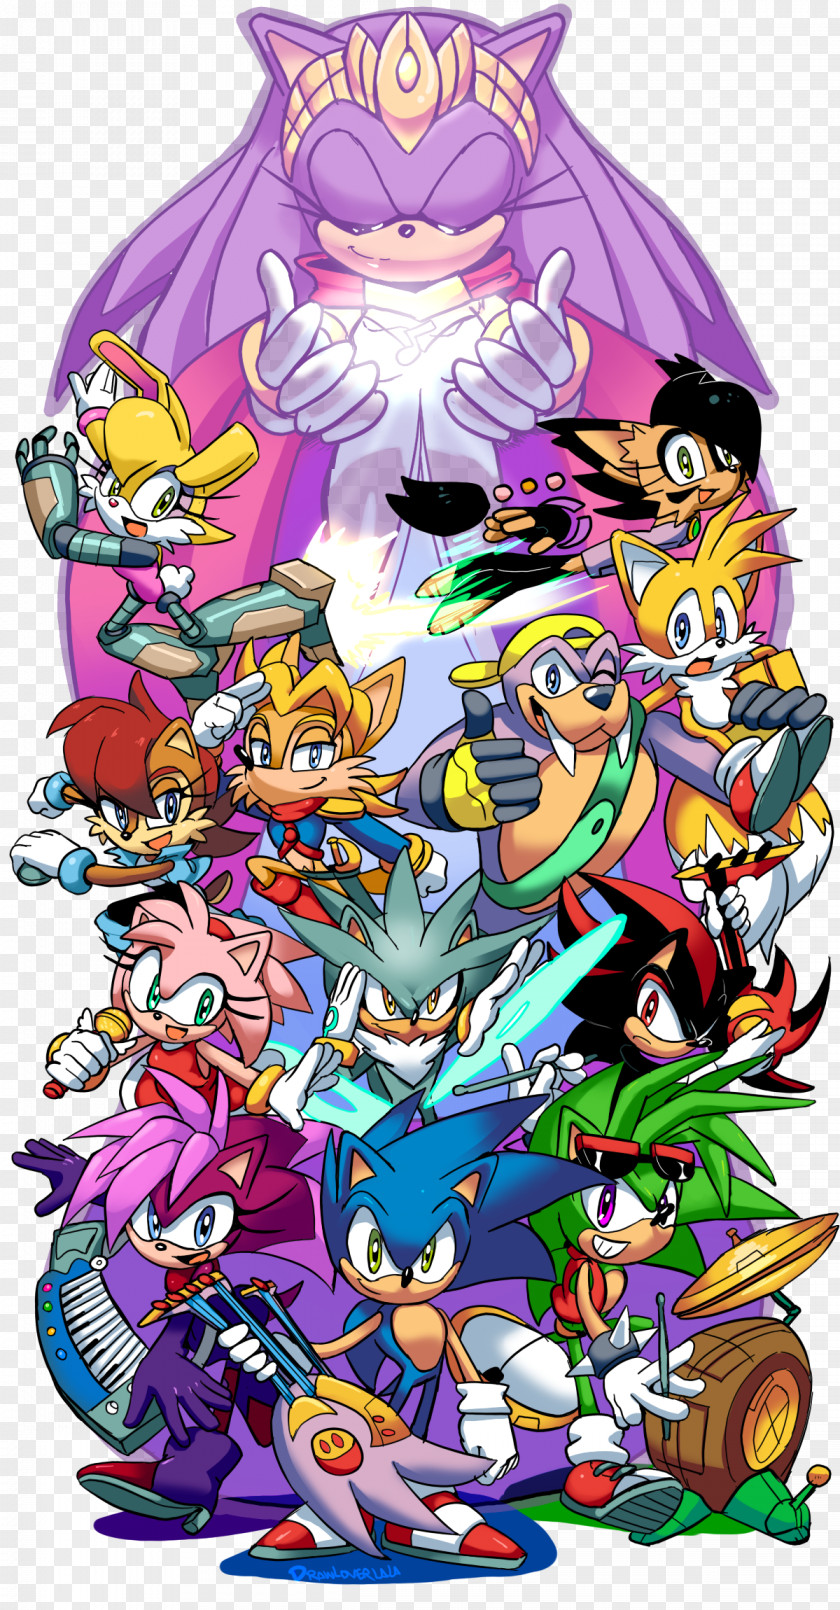 Acorn Sonic The Hedgehog Amy Rose Sonia Fighters Cream Rabbit PNG